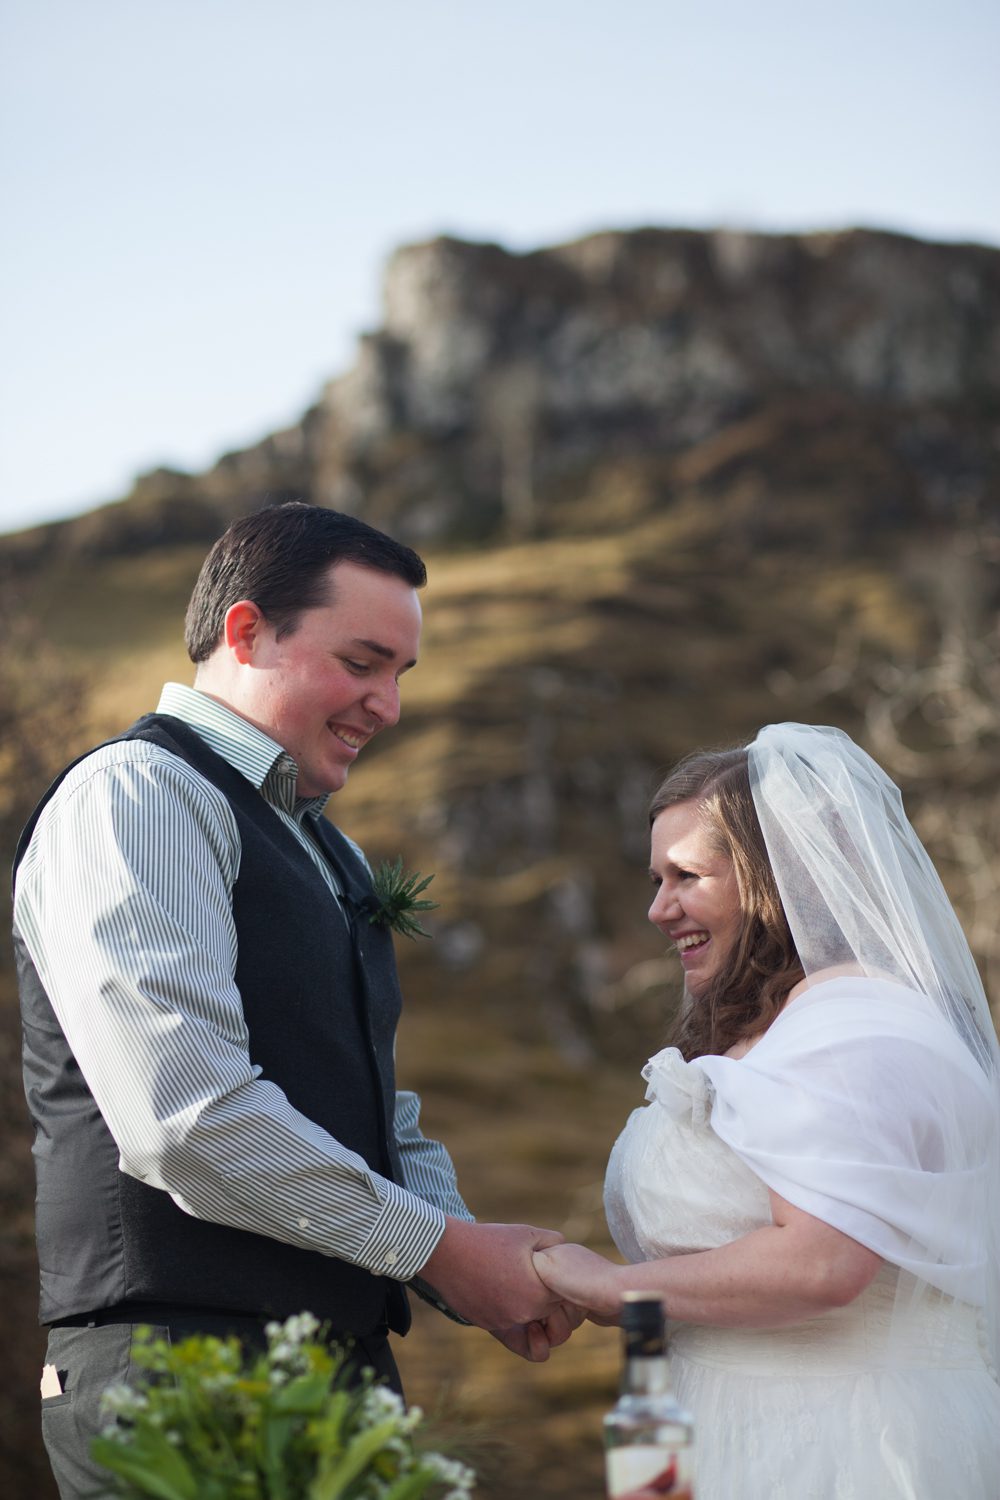 Magical elopement wedding vows at the Fairy Glen Isle of Skye